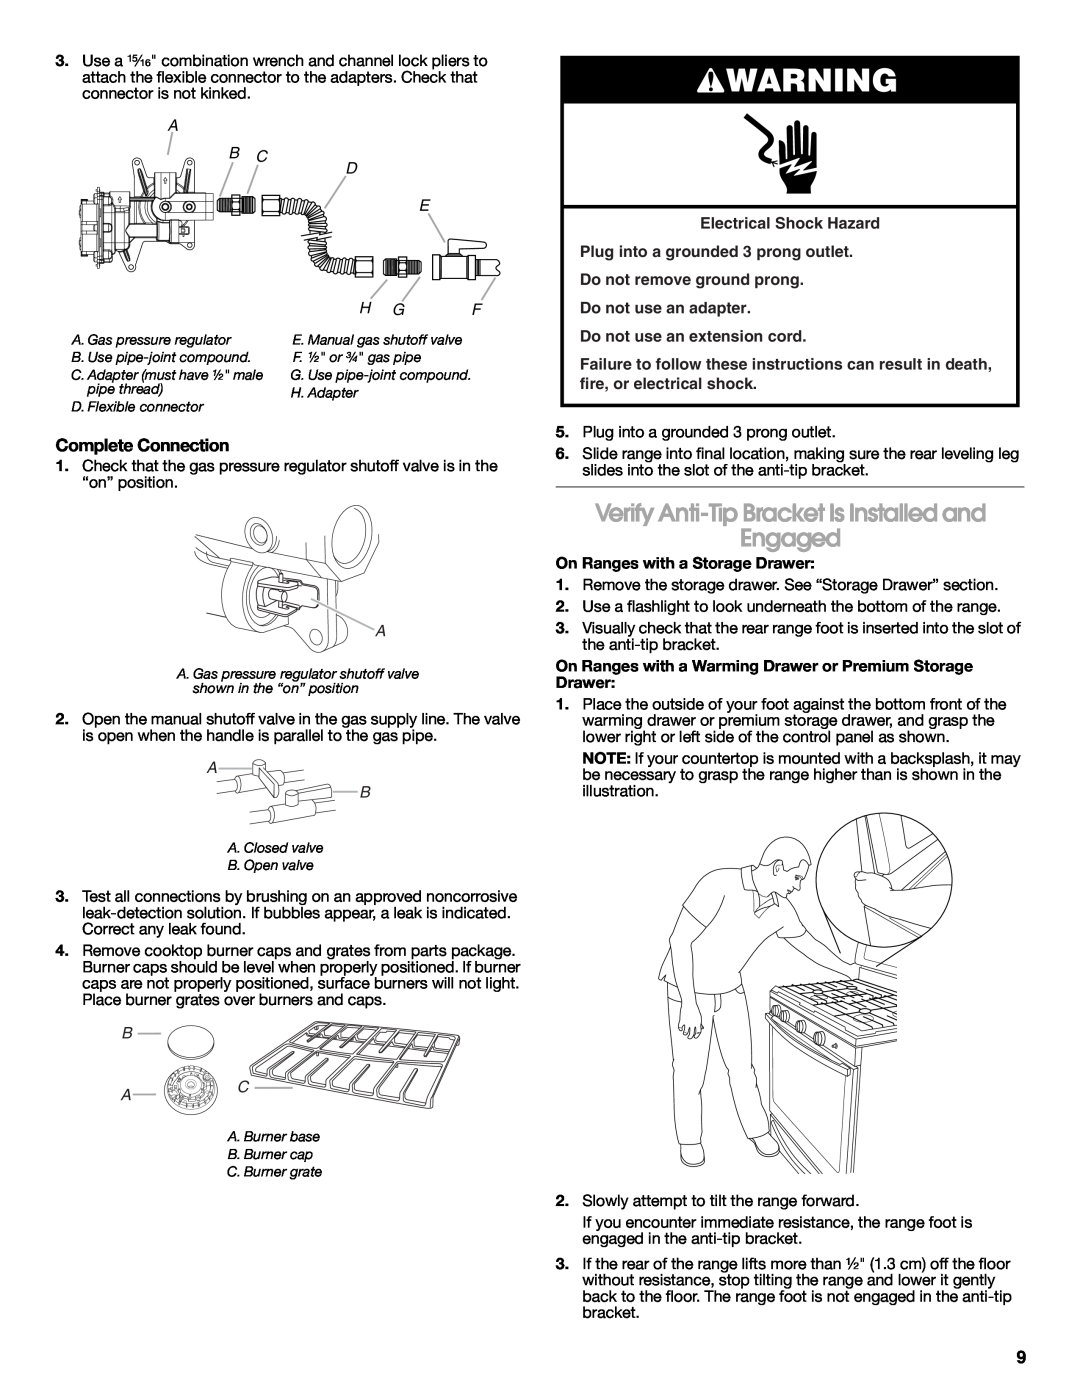 Whirlpool W10526974A Verify Anti-Tip Bracket Is Installed and Engaged, Complete Connection, A B C, D E H G F, B A C 